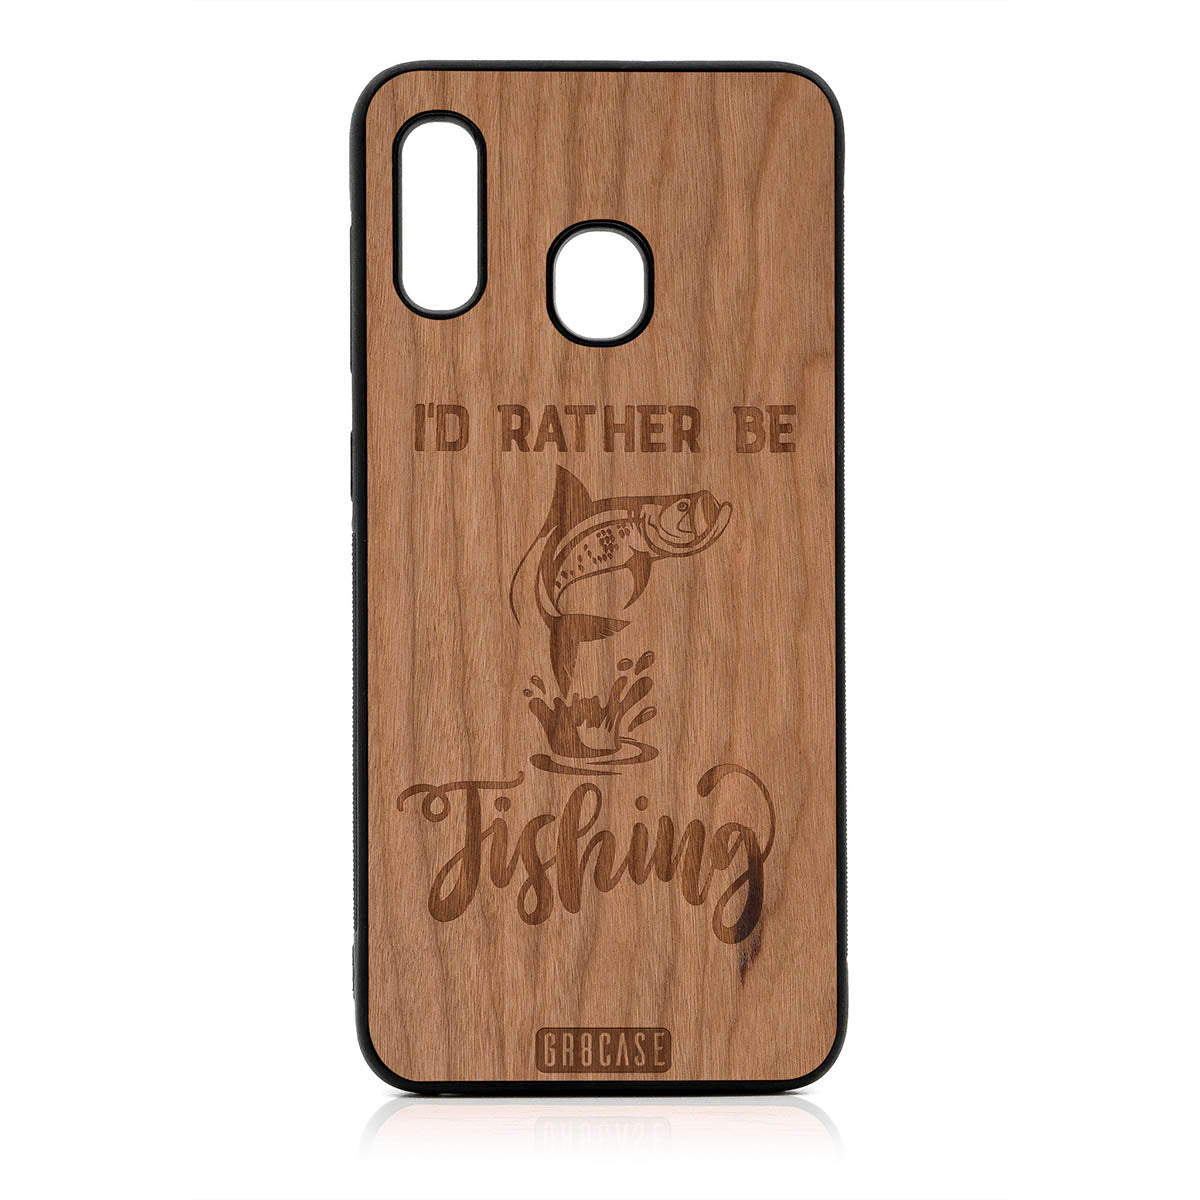 I'D Rather Be Fishing Design Wood Case For Samsung Galaxy A20